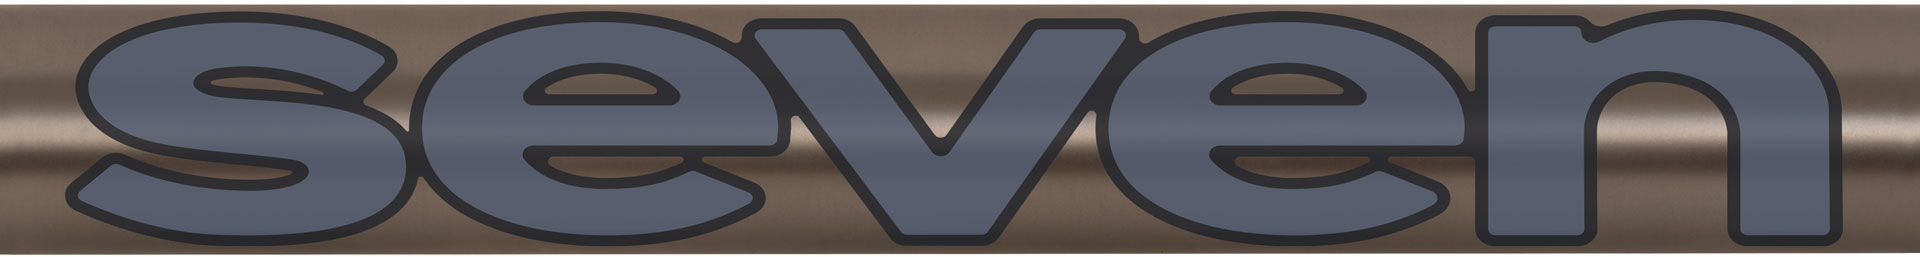 unified down tube graphic in Slate Blue, White outline